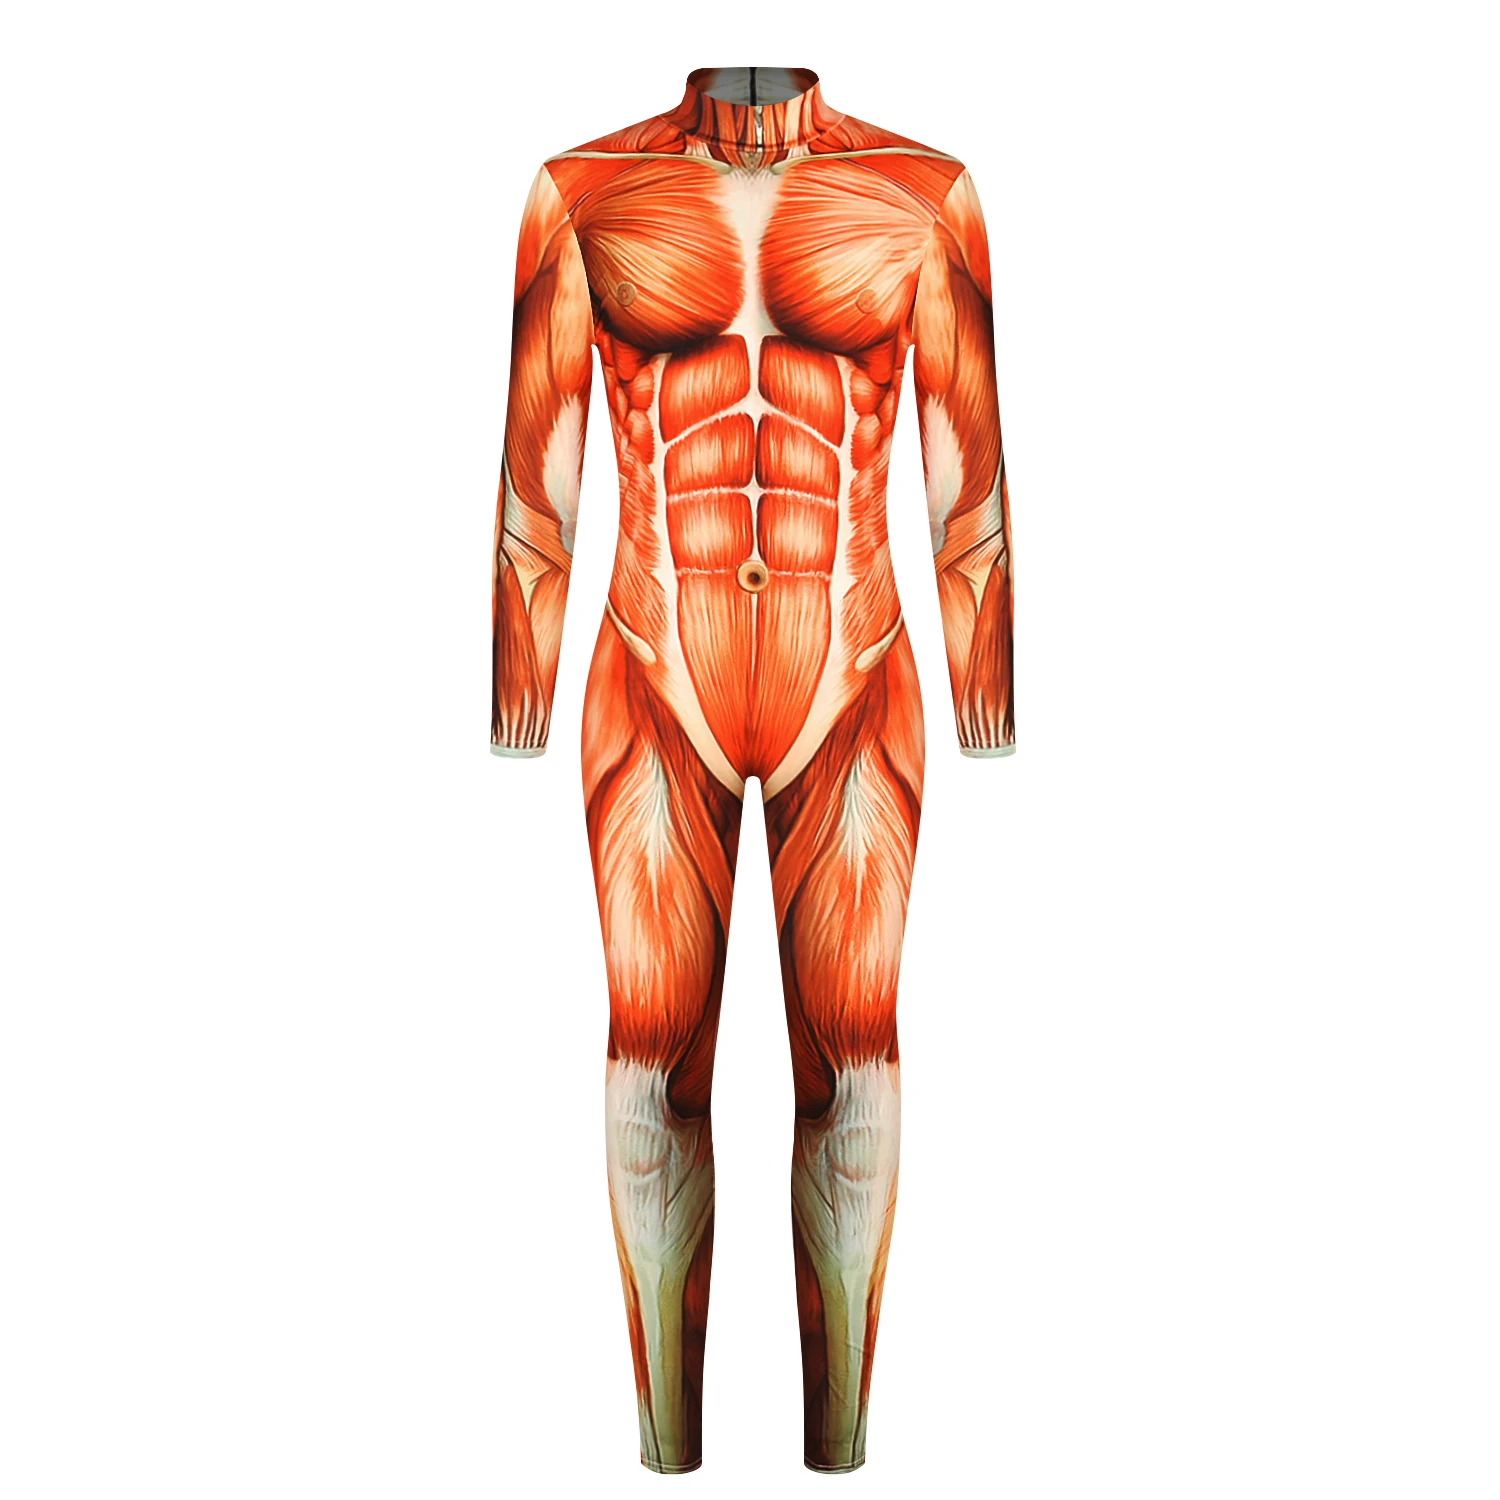 VIP FASHION 2020 Halloween Cosplay Costumes For Men Women 3D Attack On Titan Anime Printed Muscle Zentai Bodysuit Jumpsuits